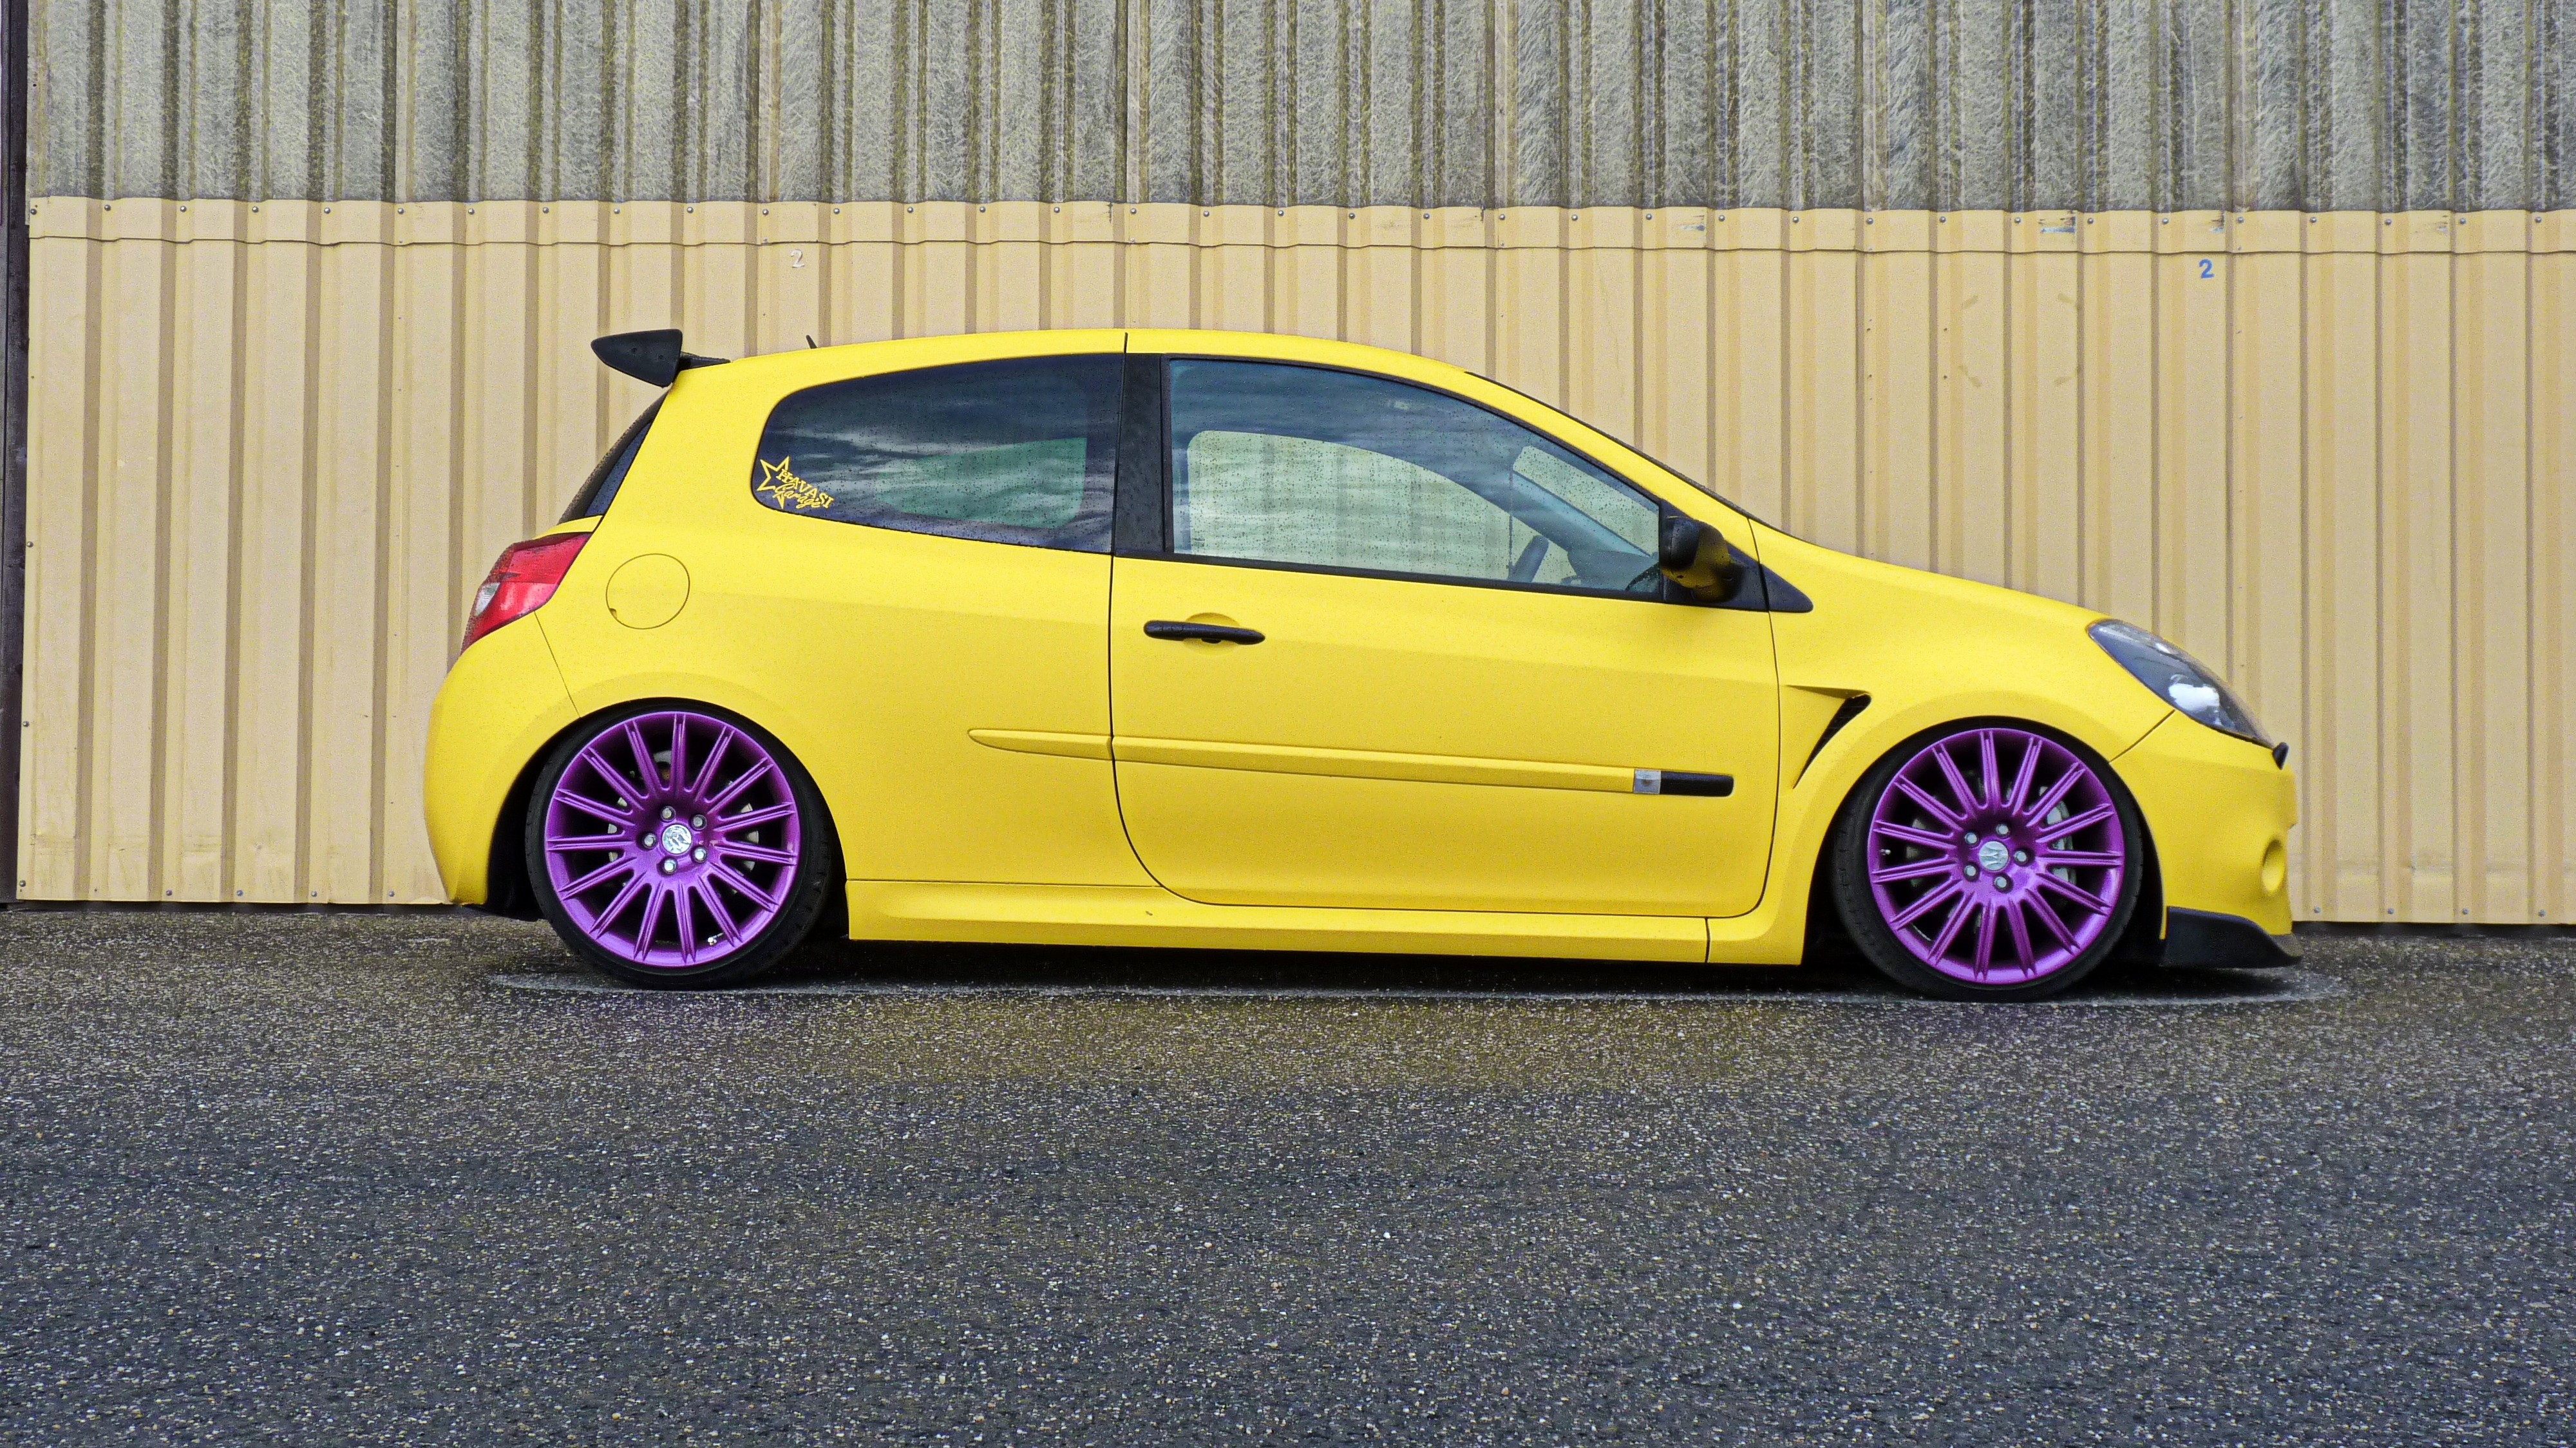 Renault, Renault Clio, Stance, Yellow cars, Car Wallpaper